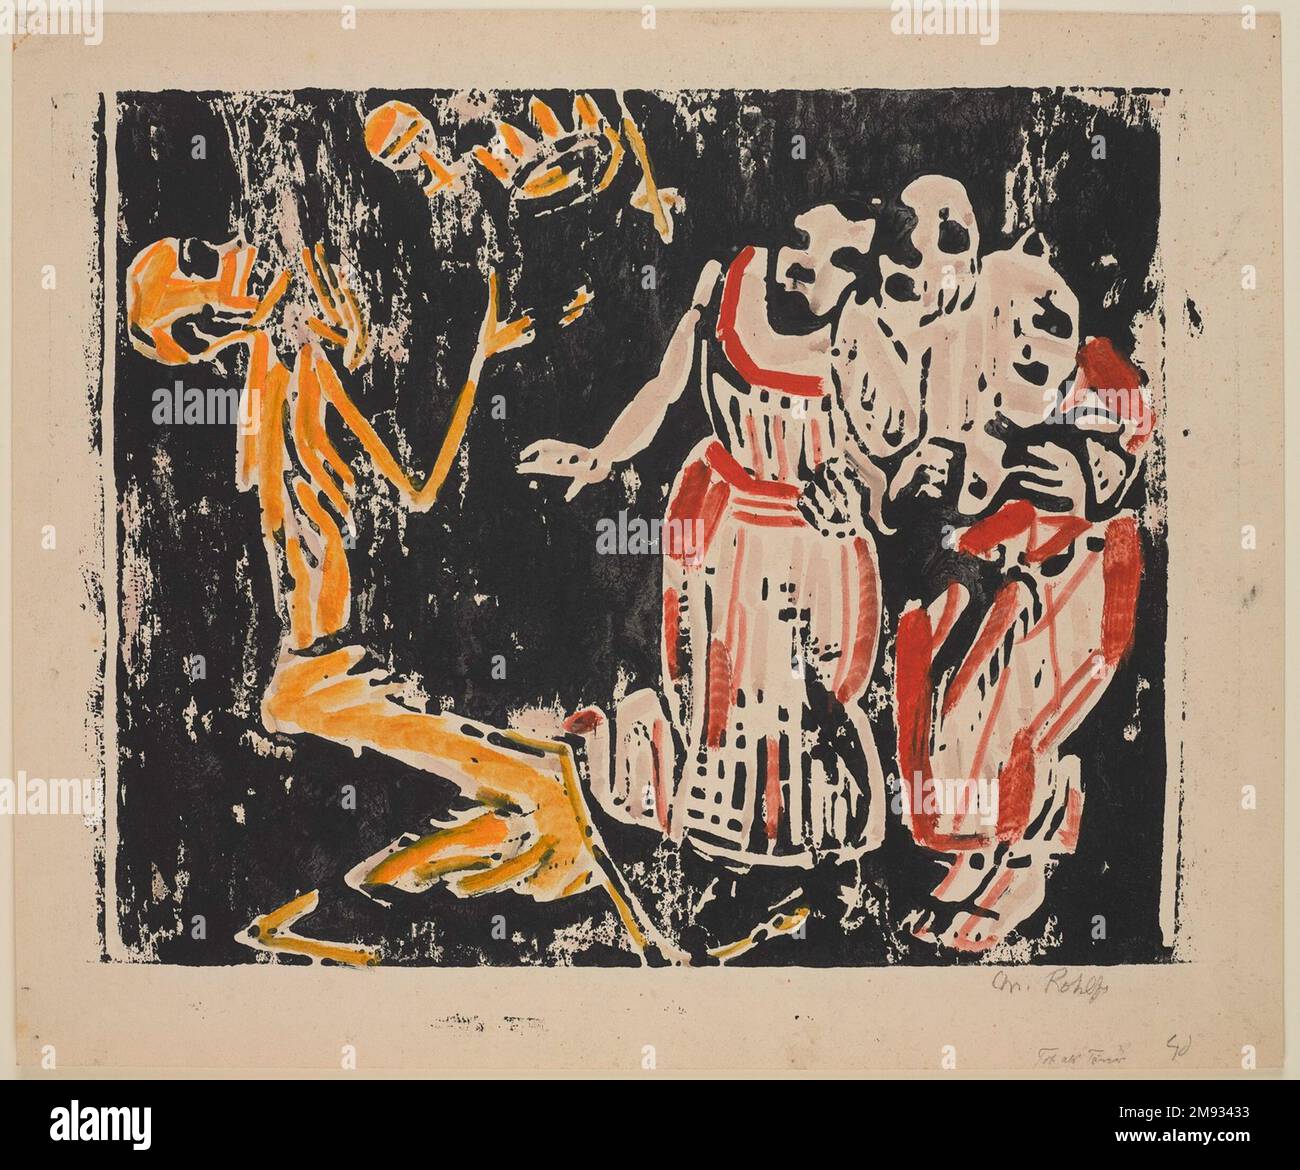 Death as Juggler (Revolution) (Tod als Jongleur [Revolution]) Christian Rohlfs (German, 1849-1939). Death as Juggler (Revolution) (Tod als Jongleur [Revolution]), 1918-1919. Color woodcut in yellow, red, and black on heavy wove paper, Image: 14 3/8 x 18 1/4 in. (36.5 x 46.4 cm).  In Christian Rohlfs’s roughly hewn, unsettling woodcut, two women recoil from a skeleton juggling symbols of earthly power—an orb, a scepter, and a crown. The image is a reference to the danse macabre, or dance of death, a common medieval pictorial motif that served as a reminder that death is inevitable and impartial Stock Photo